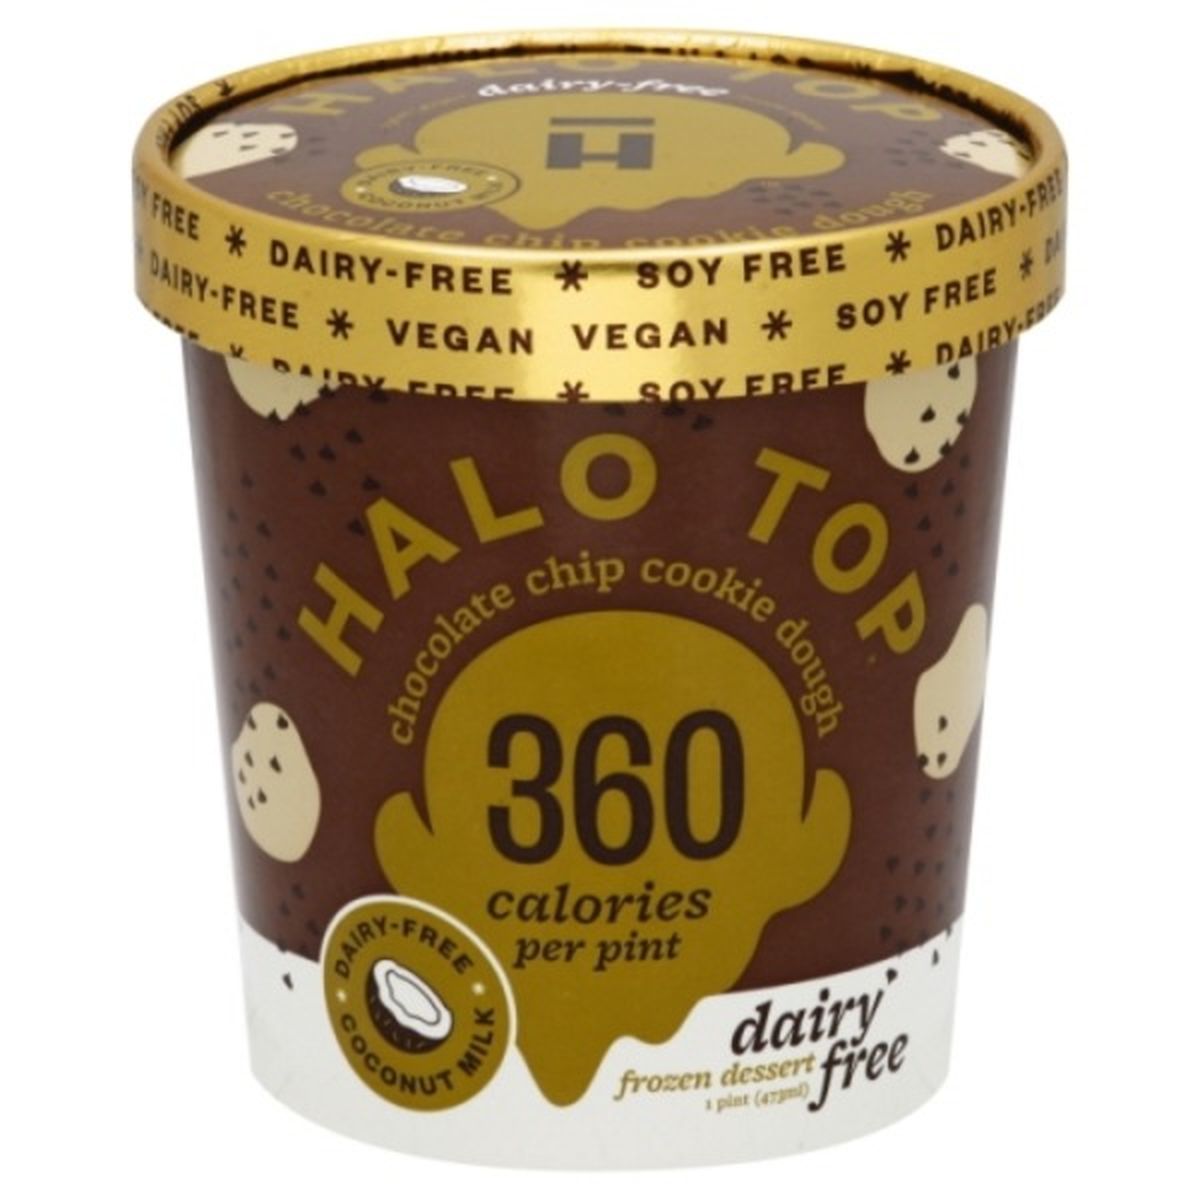 Calories in Halo Top Frozen Dessert, Dairy Free, Chocolate Chip Cookie Dough